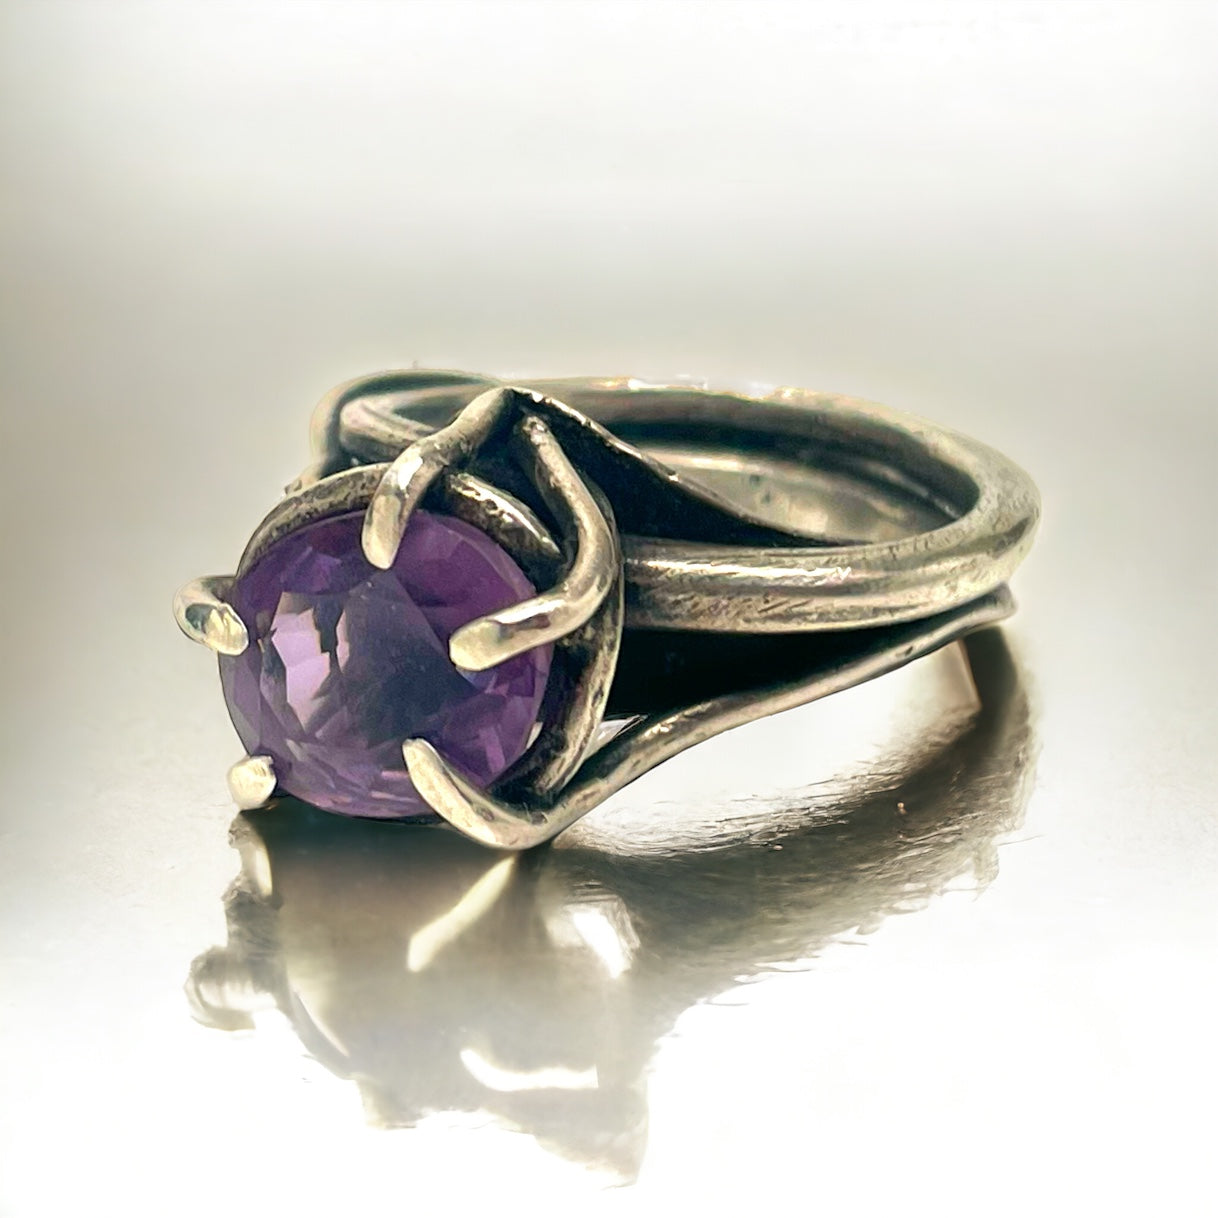 a sterling silver and amethyst ring rests on a white reflective tabletop surface